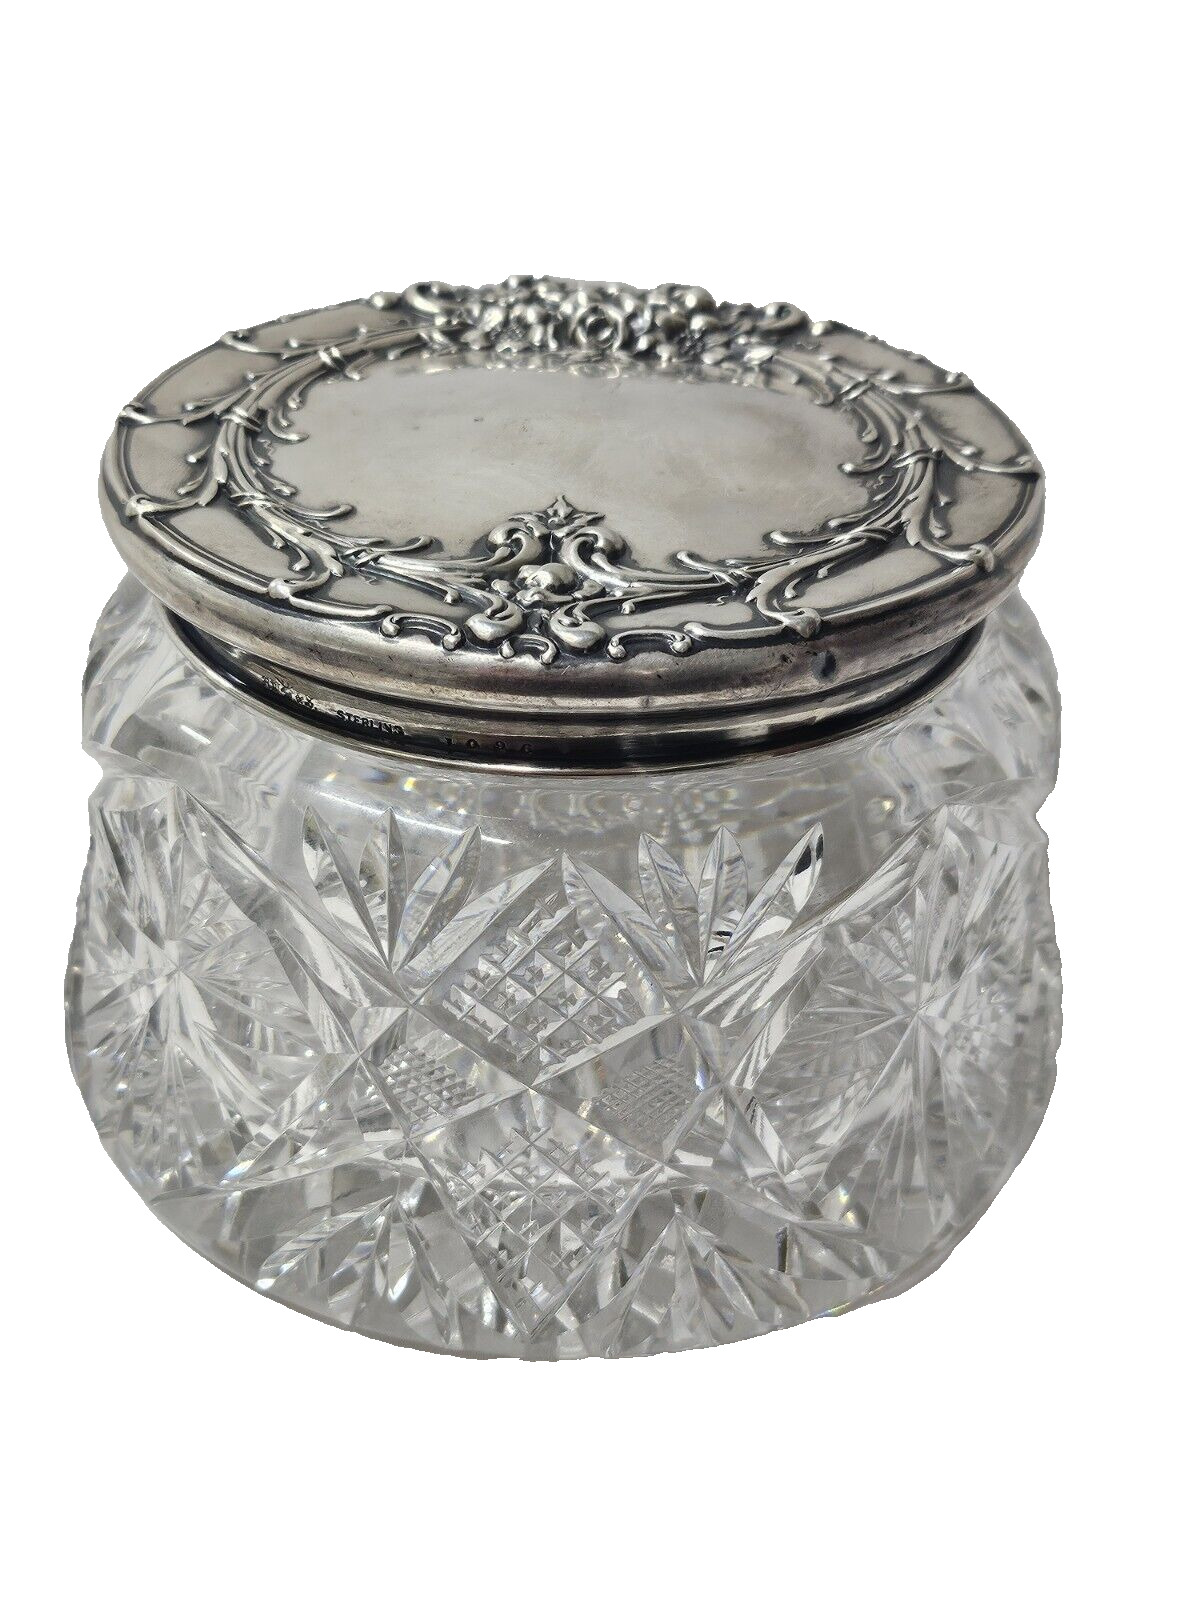 Antique Wallace Sterling Silver Crystal Flora Pattern Powder Jar - Early 1900s